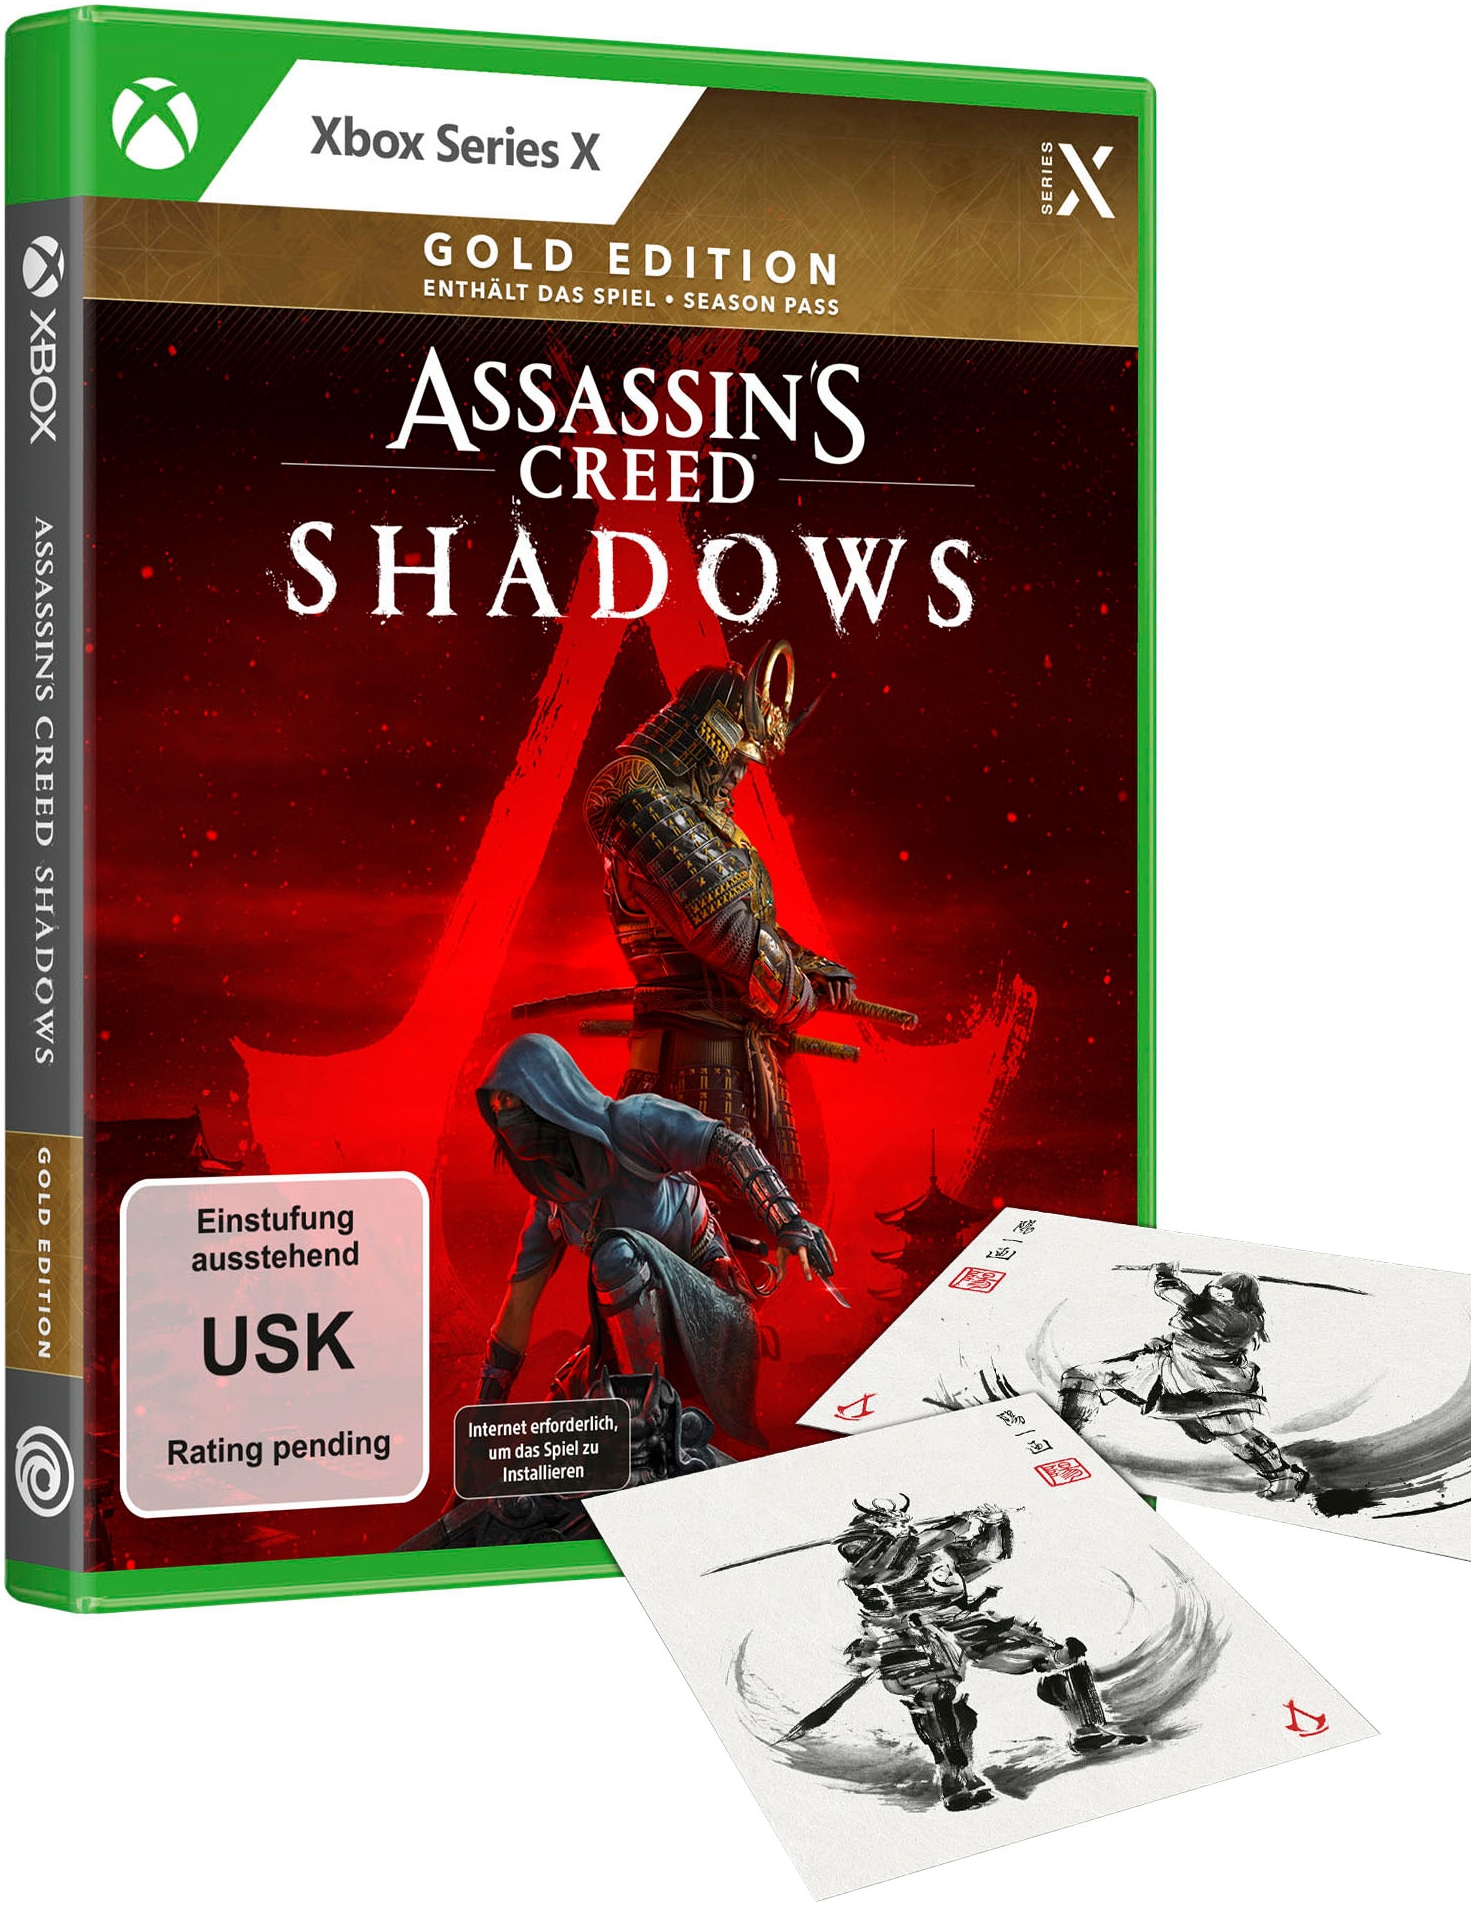 Spielesoftware »Assassin's Creed Shadows Gold Edition«, Xbox Series X